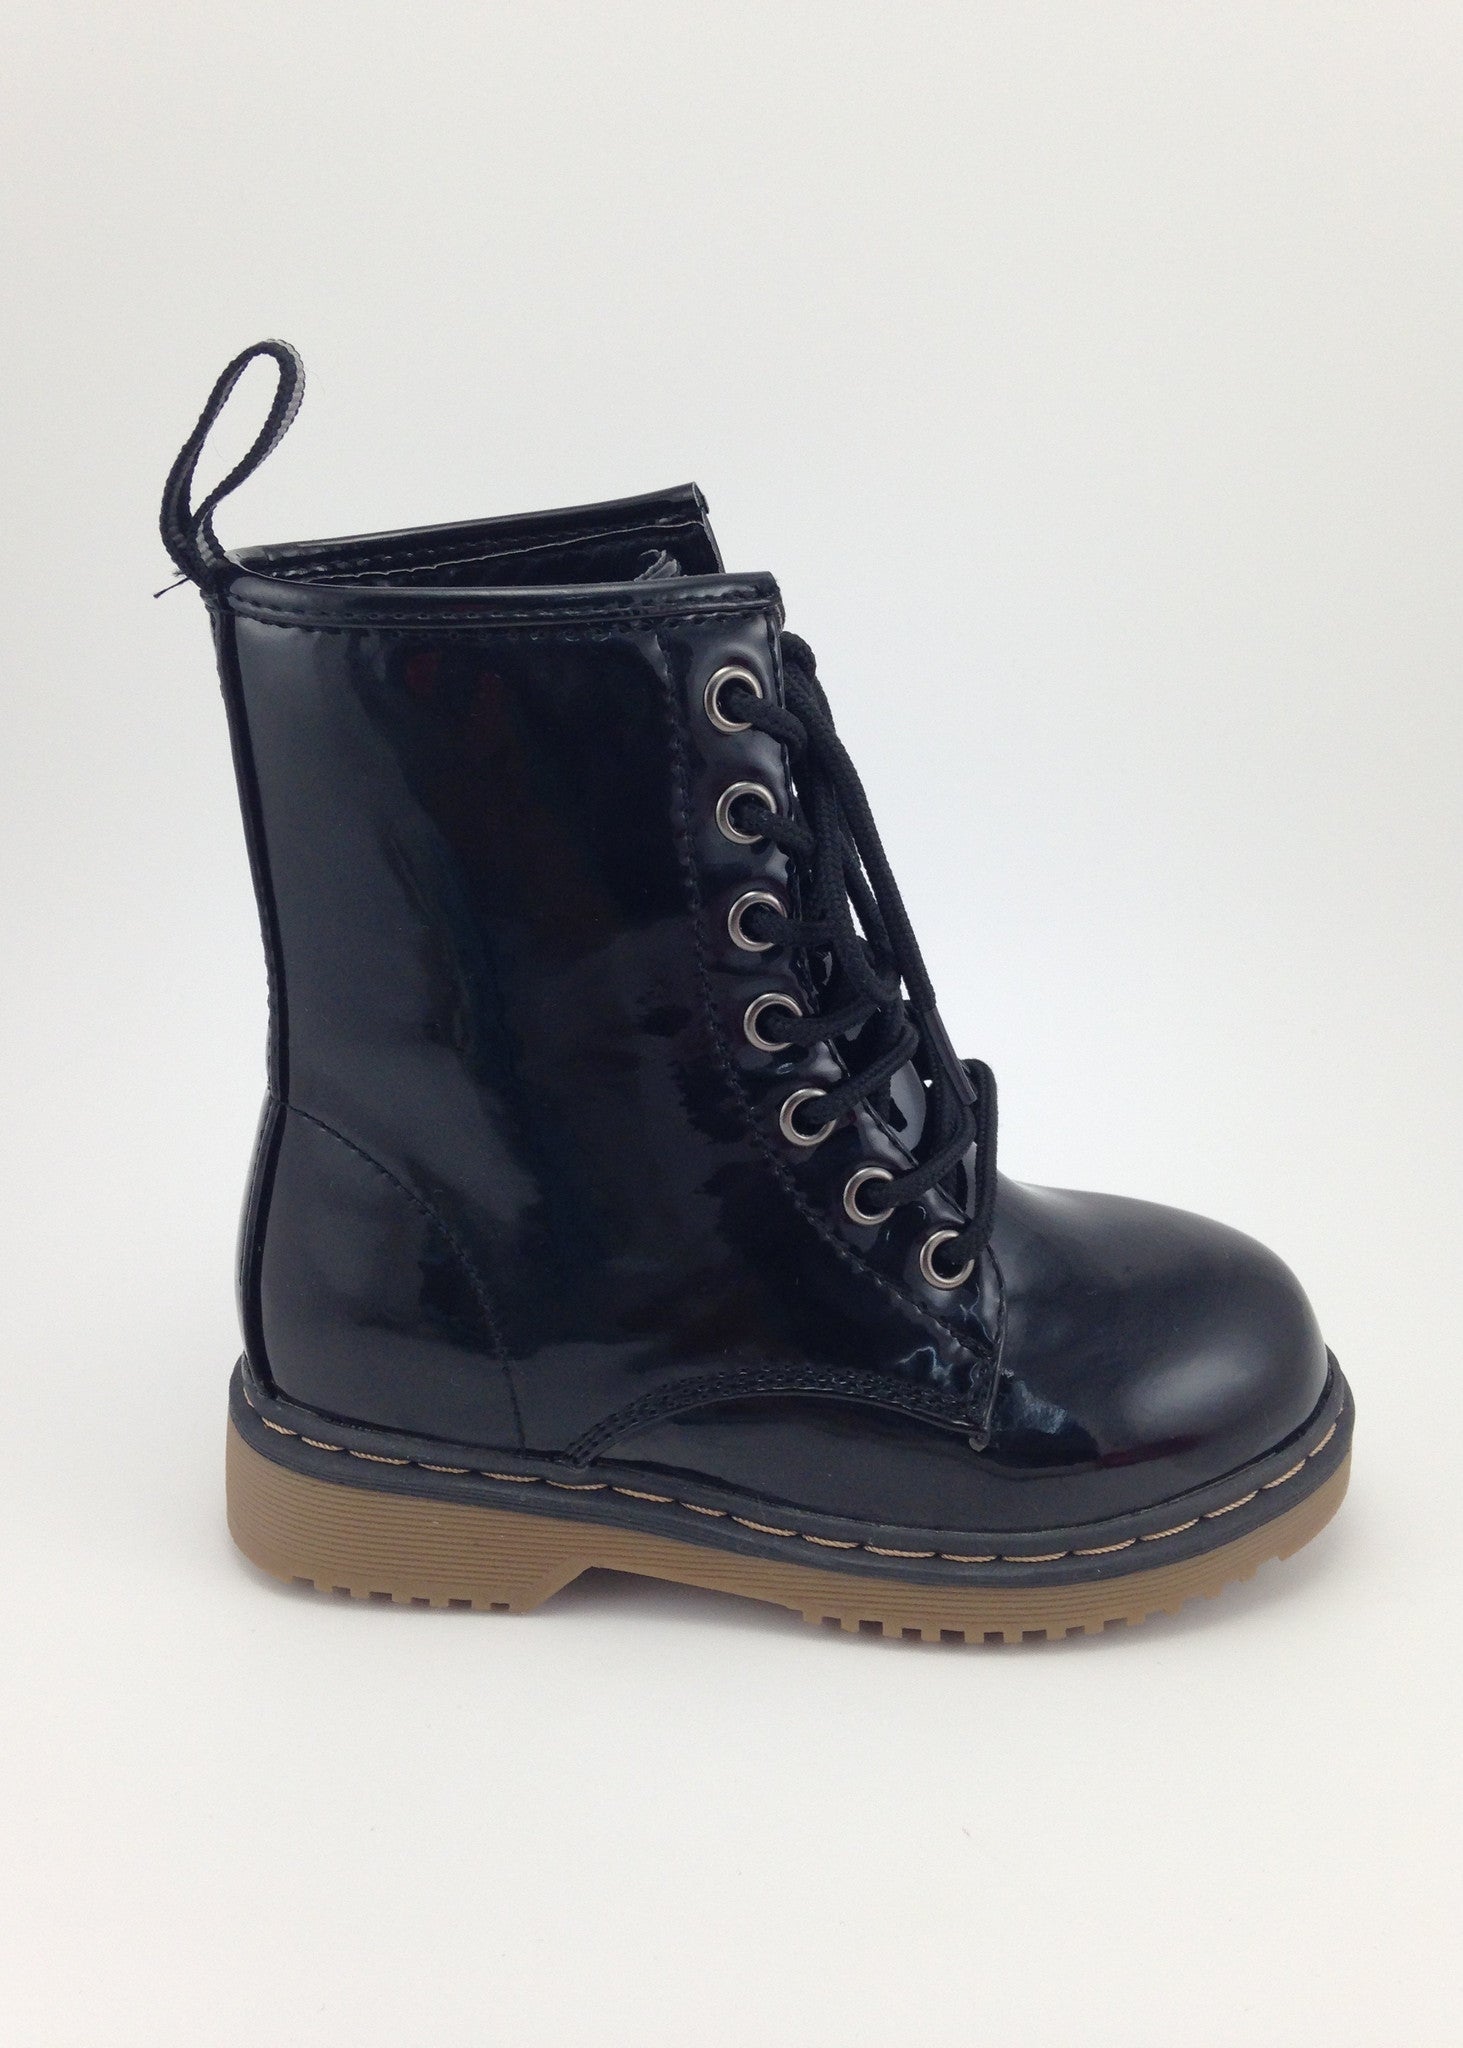 Girls Shoes | Girls Black Patent Boots 